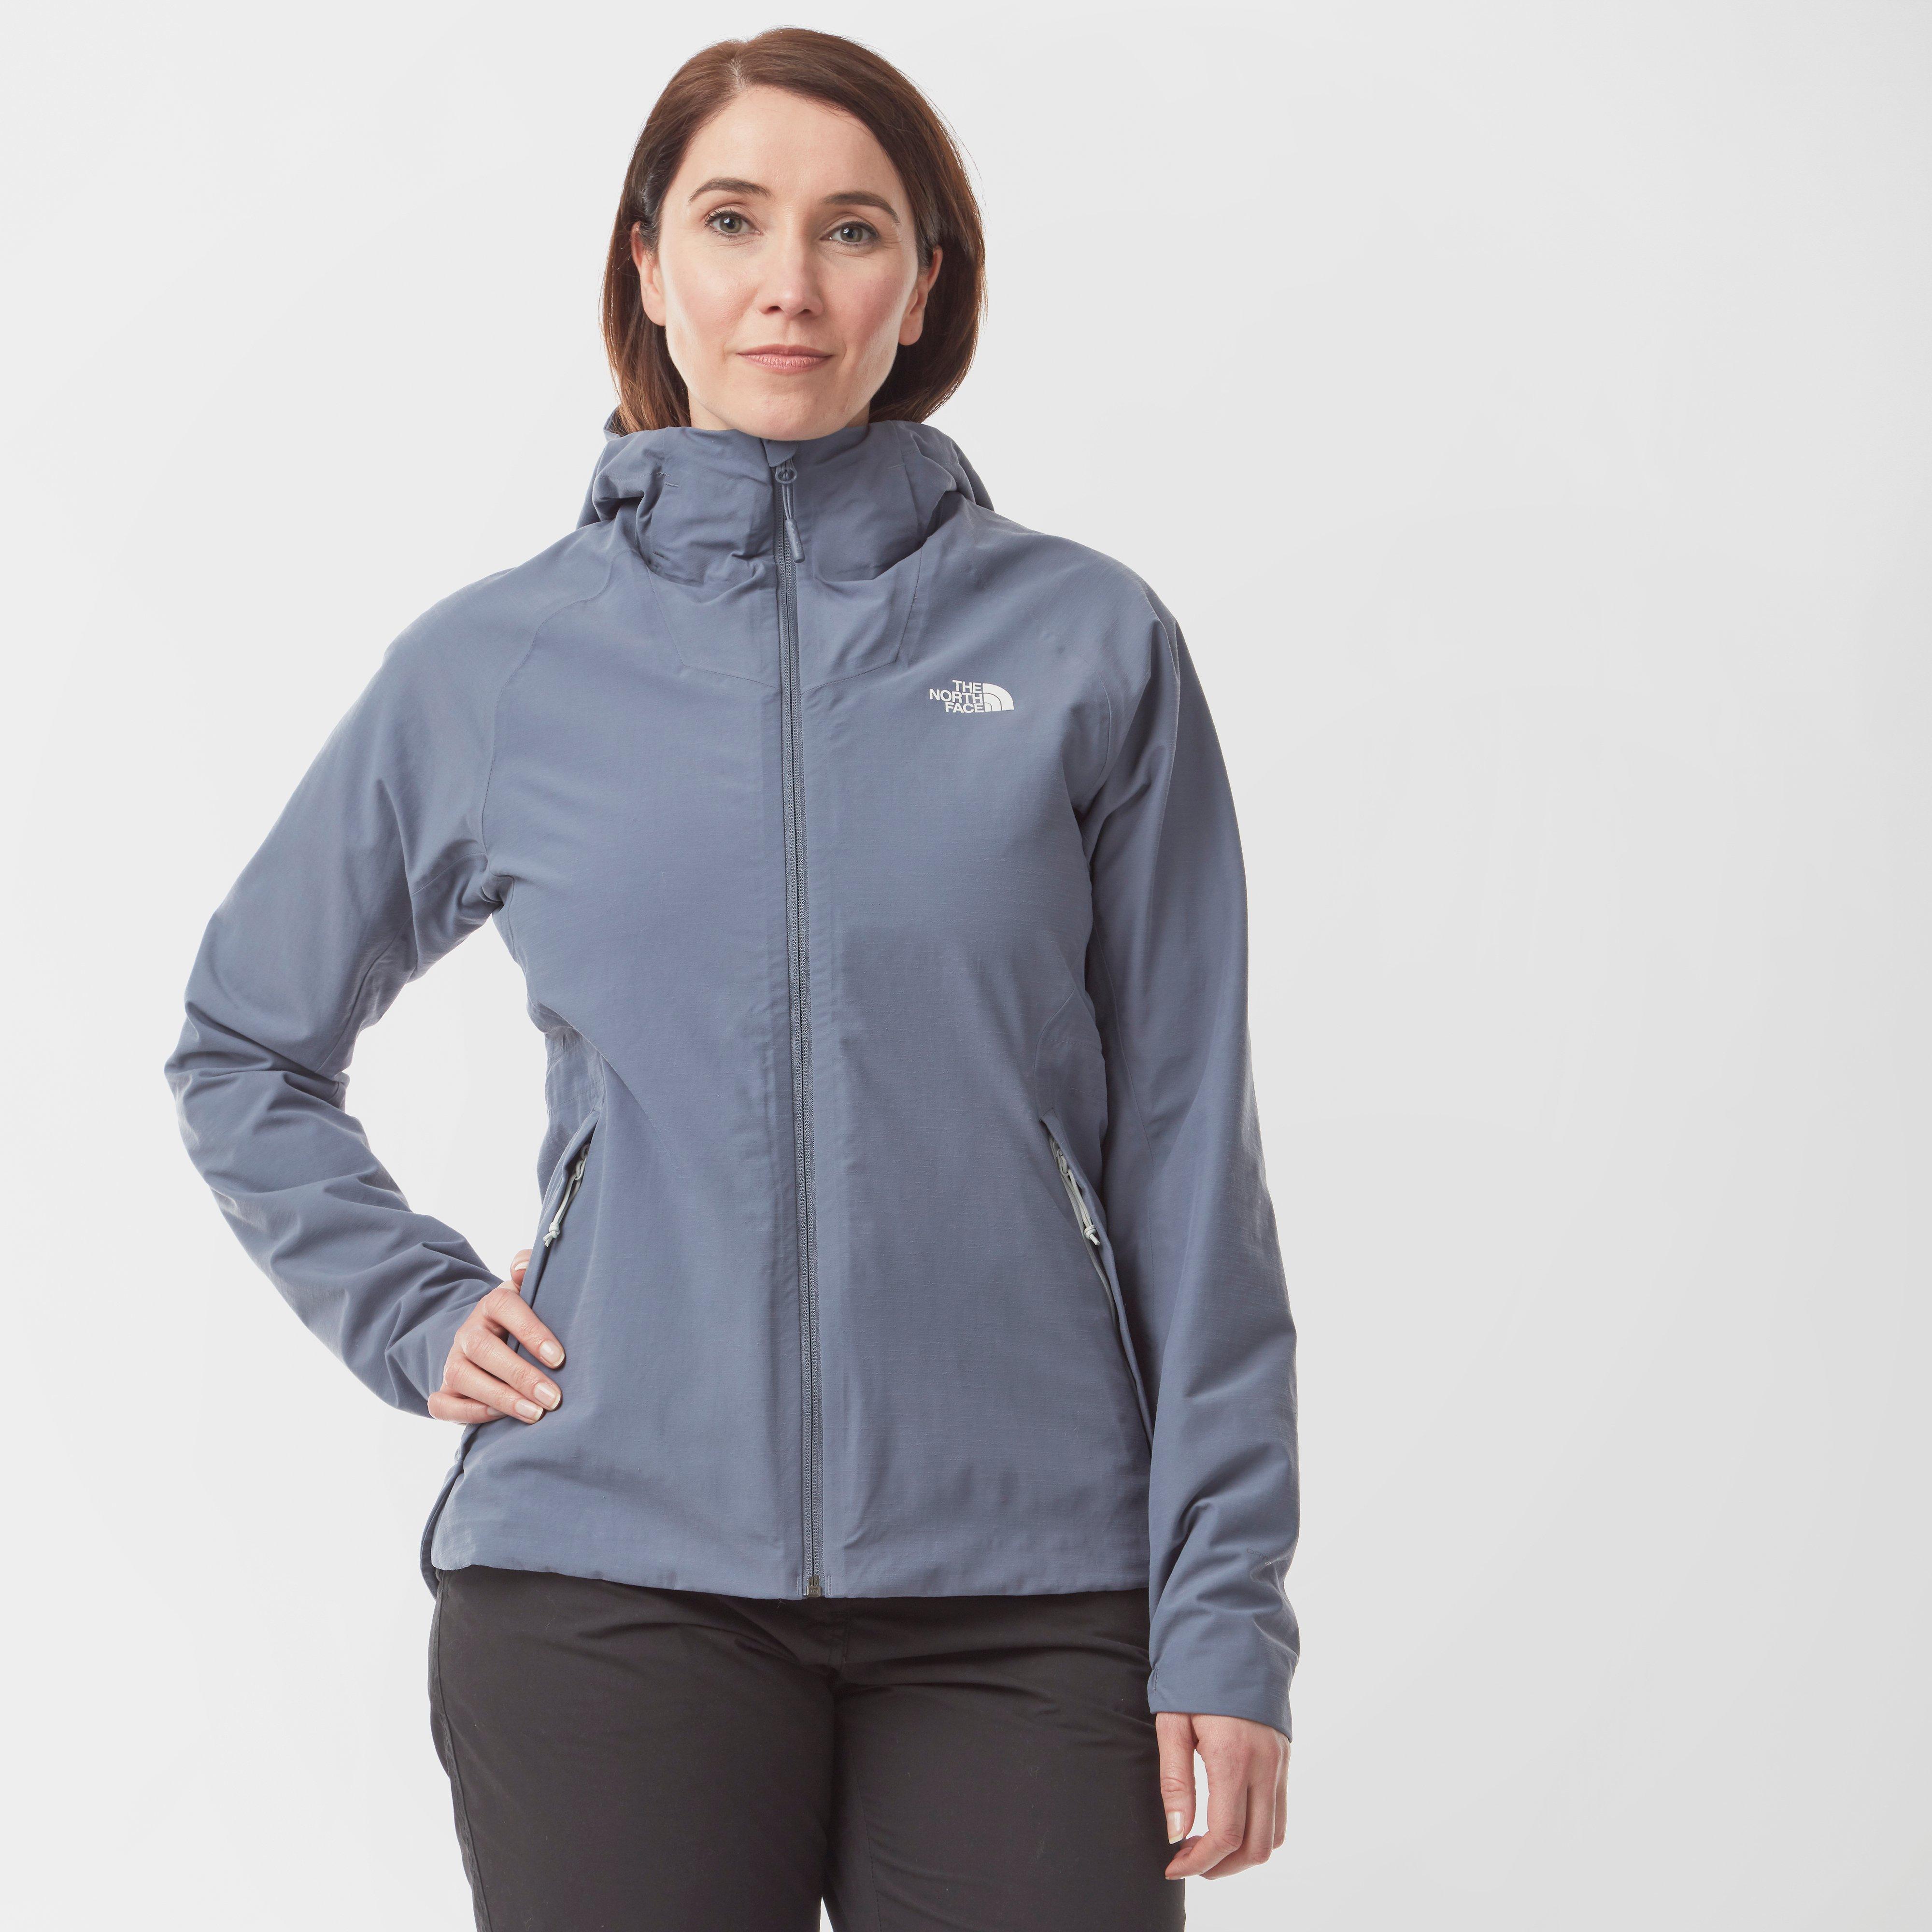 The North Face Women's Invene Jacket 